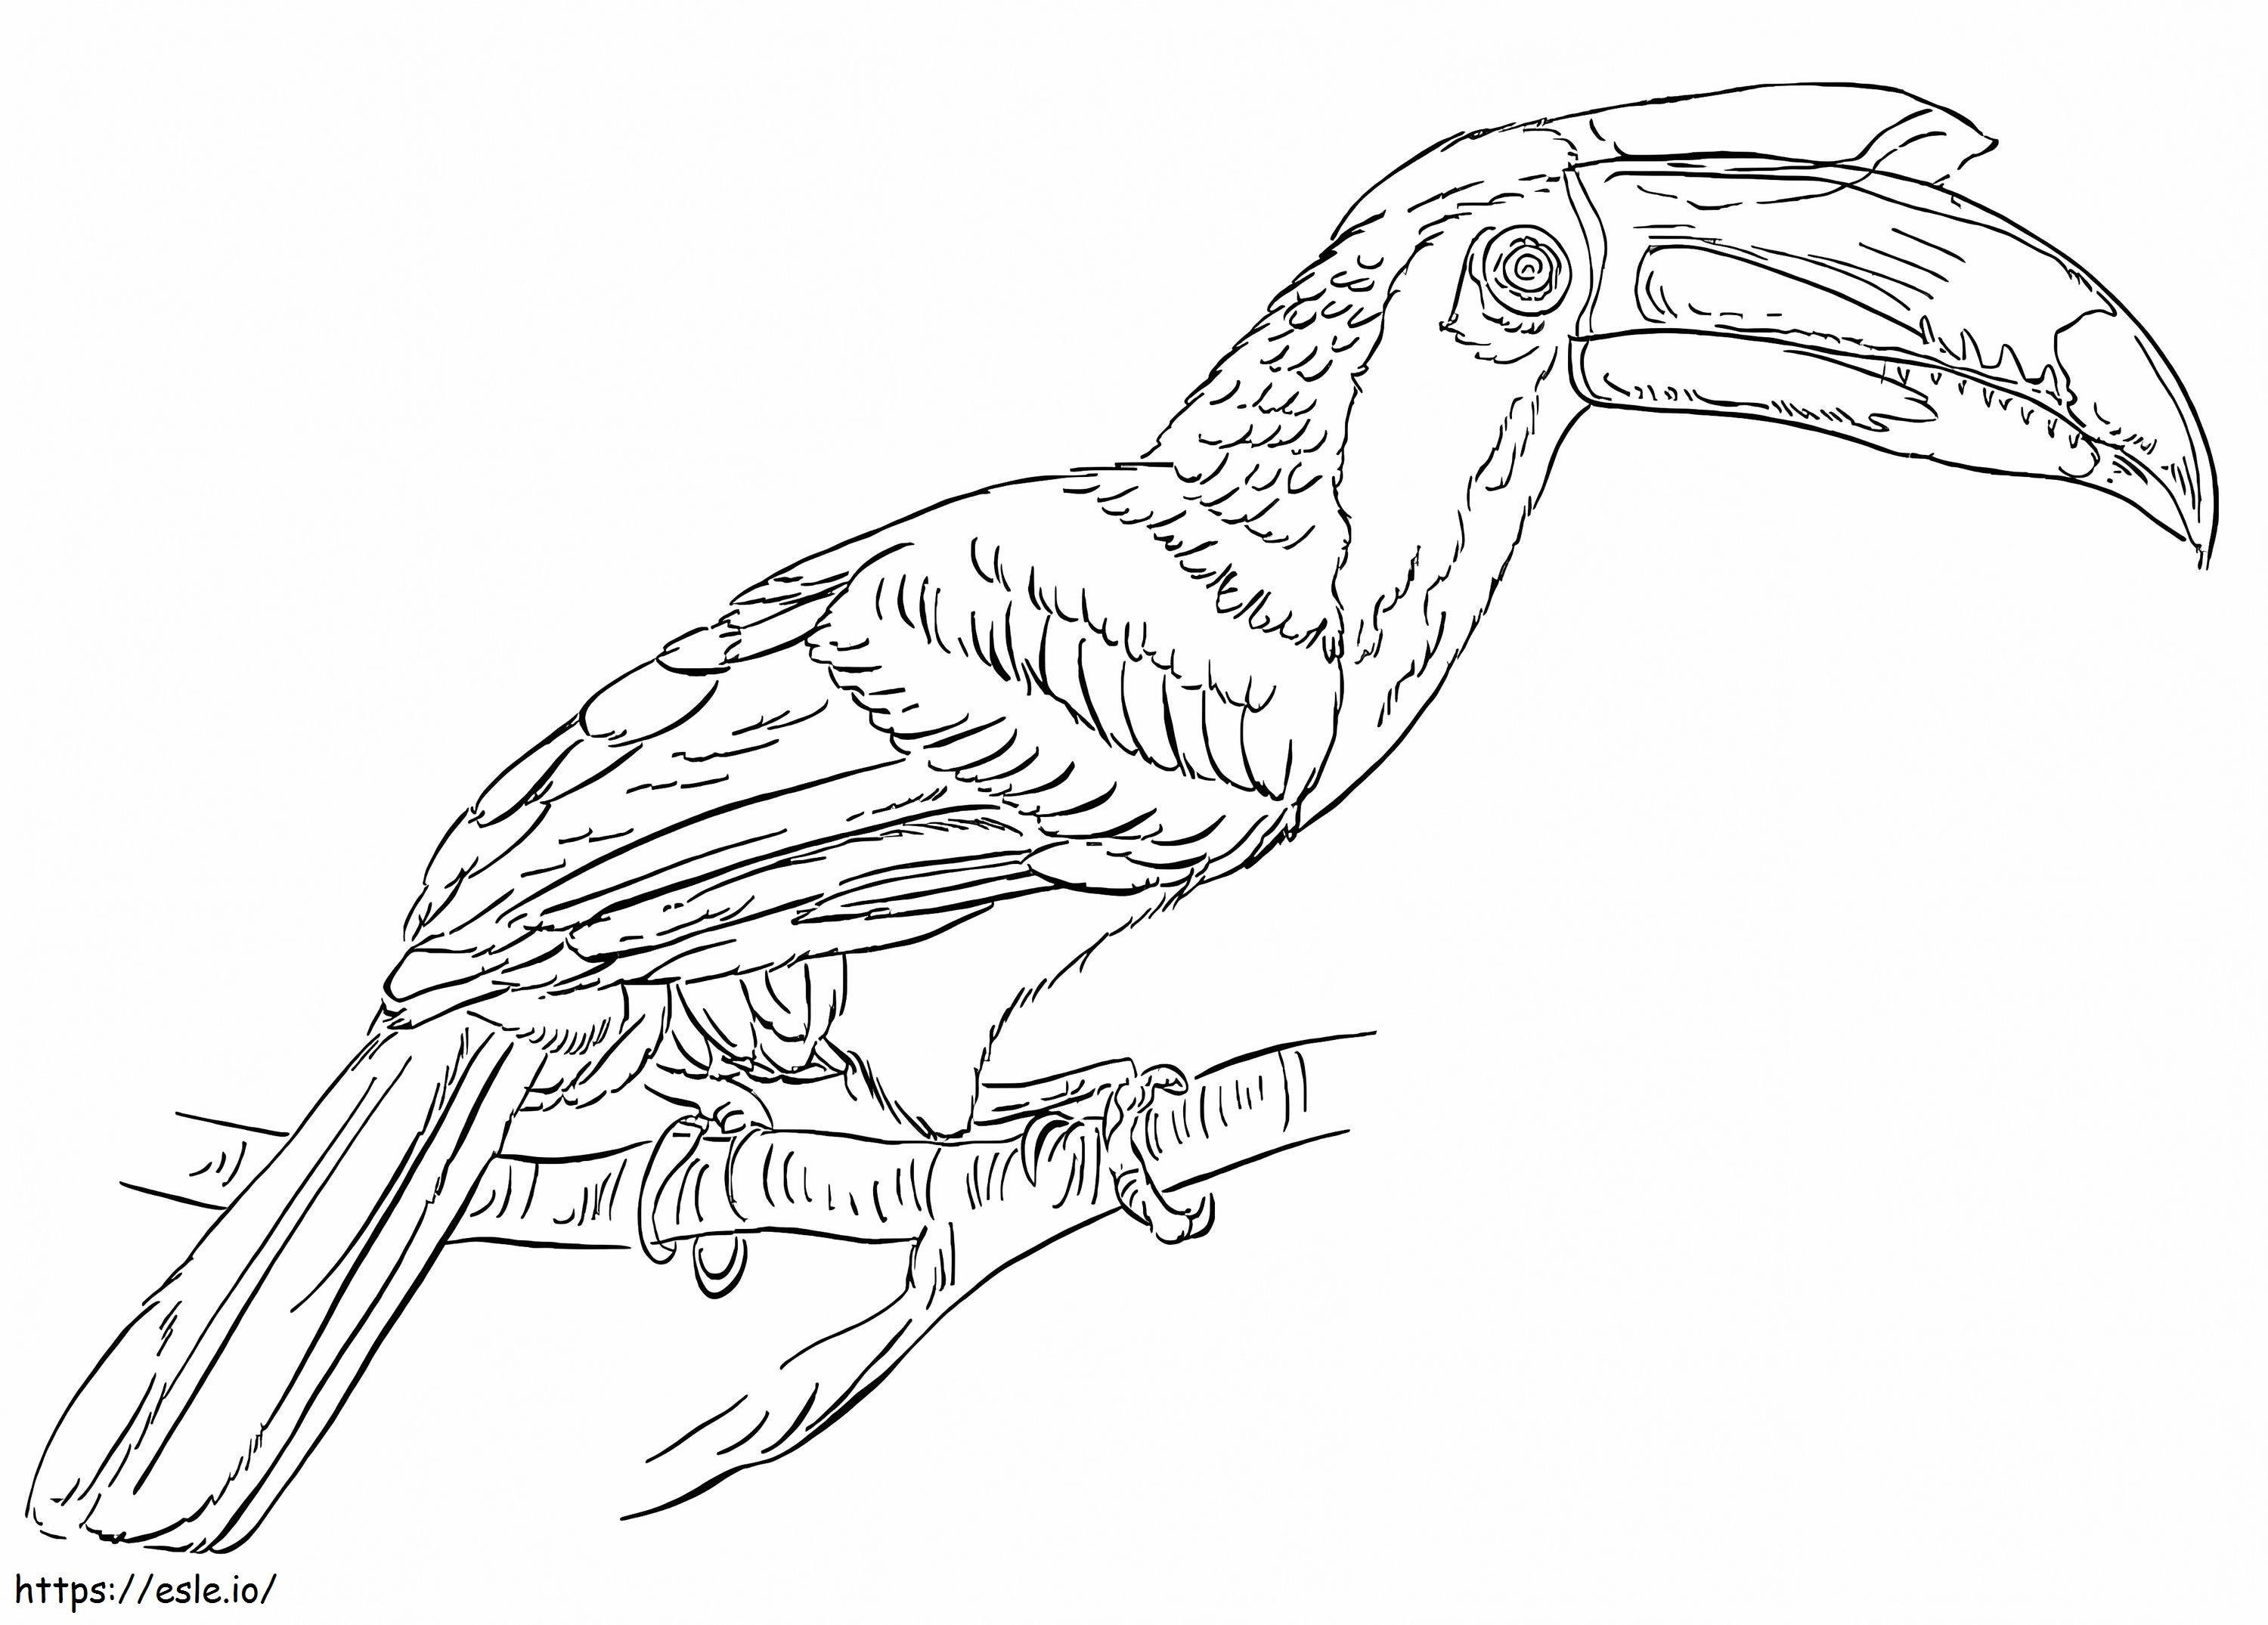 Malabar Pied Hornbill coloring page